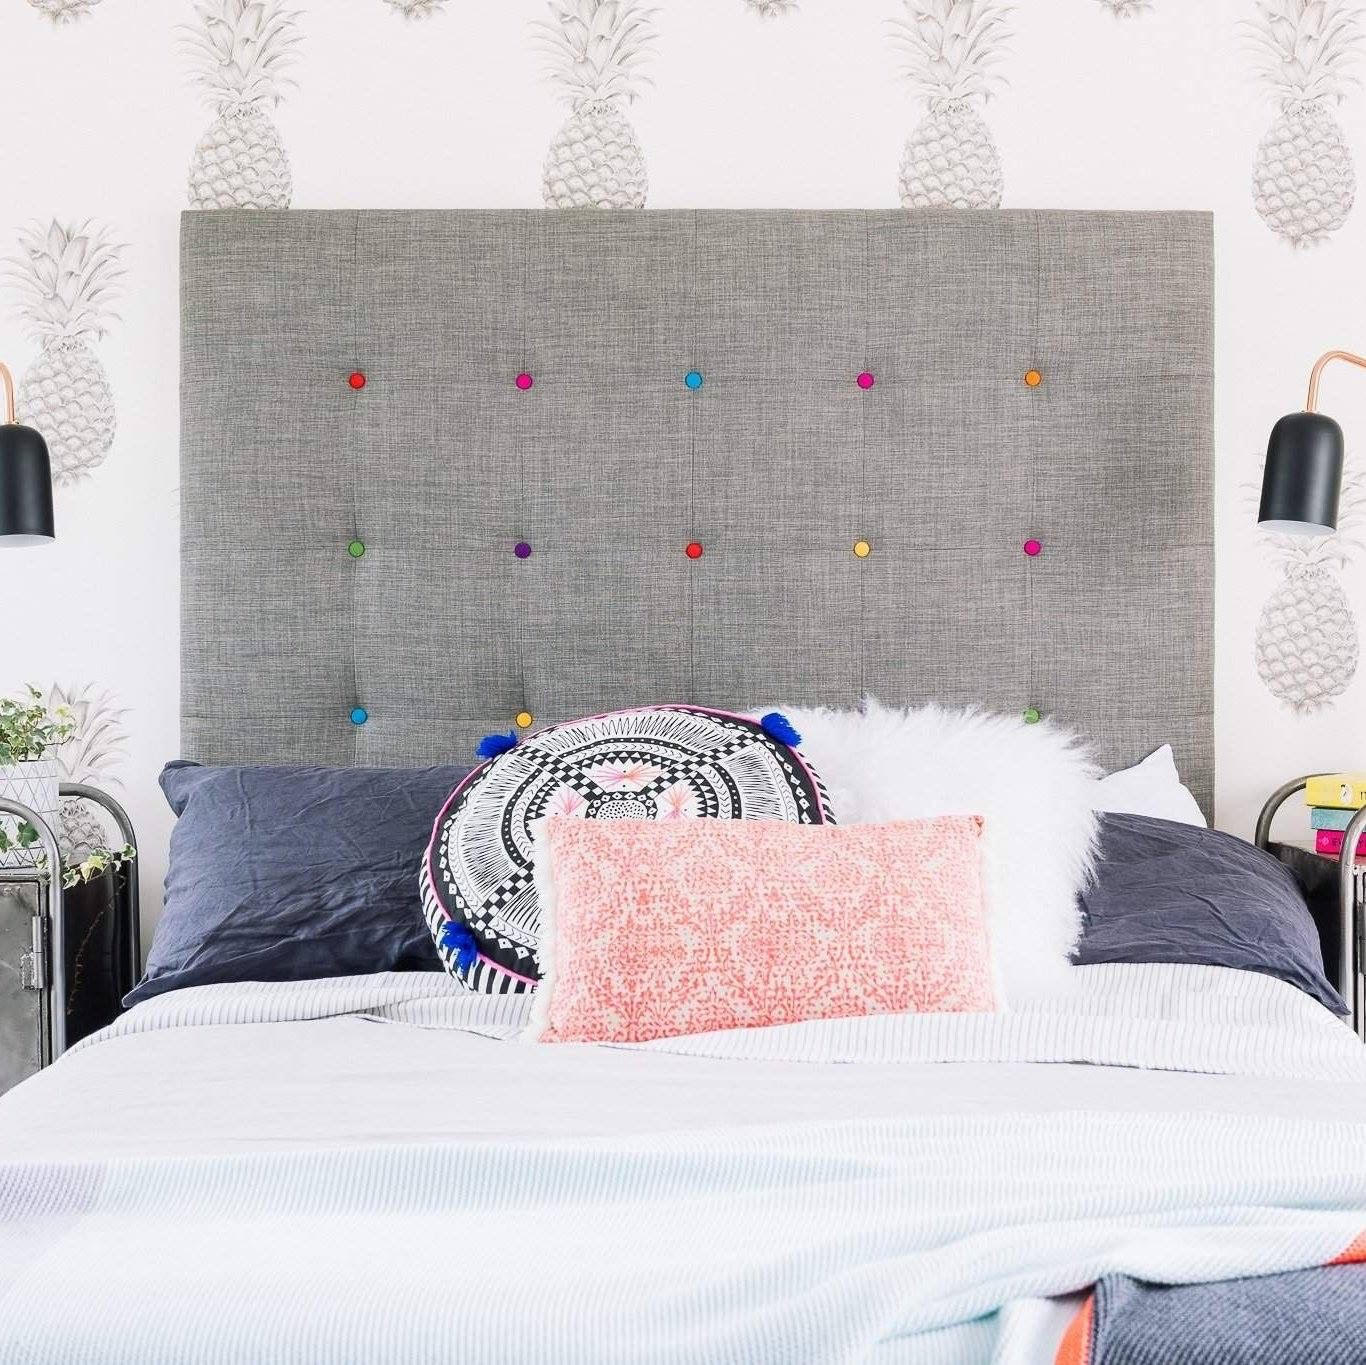 The Rainbow Button Headboard is super fun! A simple grey jacquard is the perfect background to make the bright buttons pop. Available from a Single through a California King. All our headboards are made to order in Auckland, NZ, please allow 6-8 weeks for production.